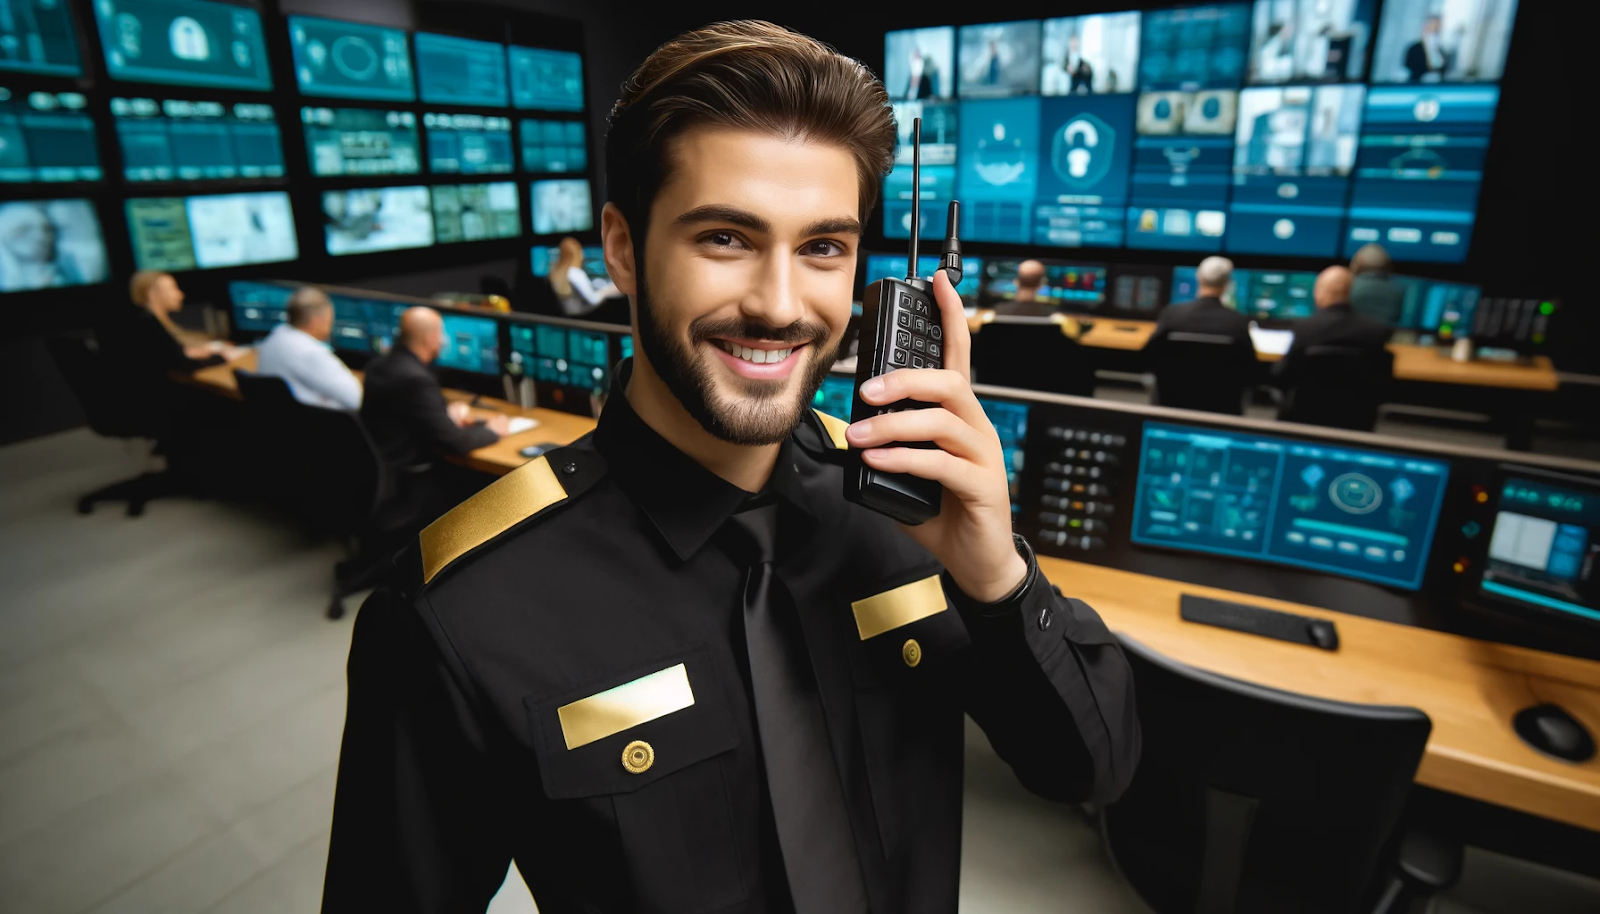 Cheerful security guard using modern communication tools in a busy control room, enhancing team coordination.